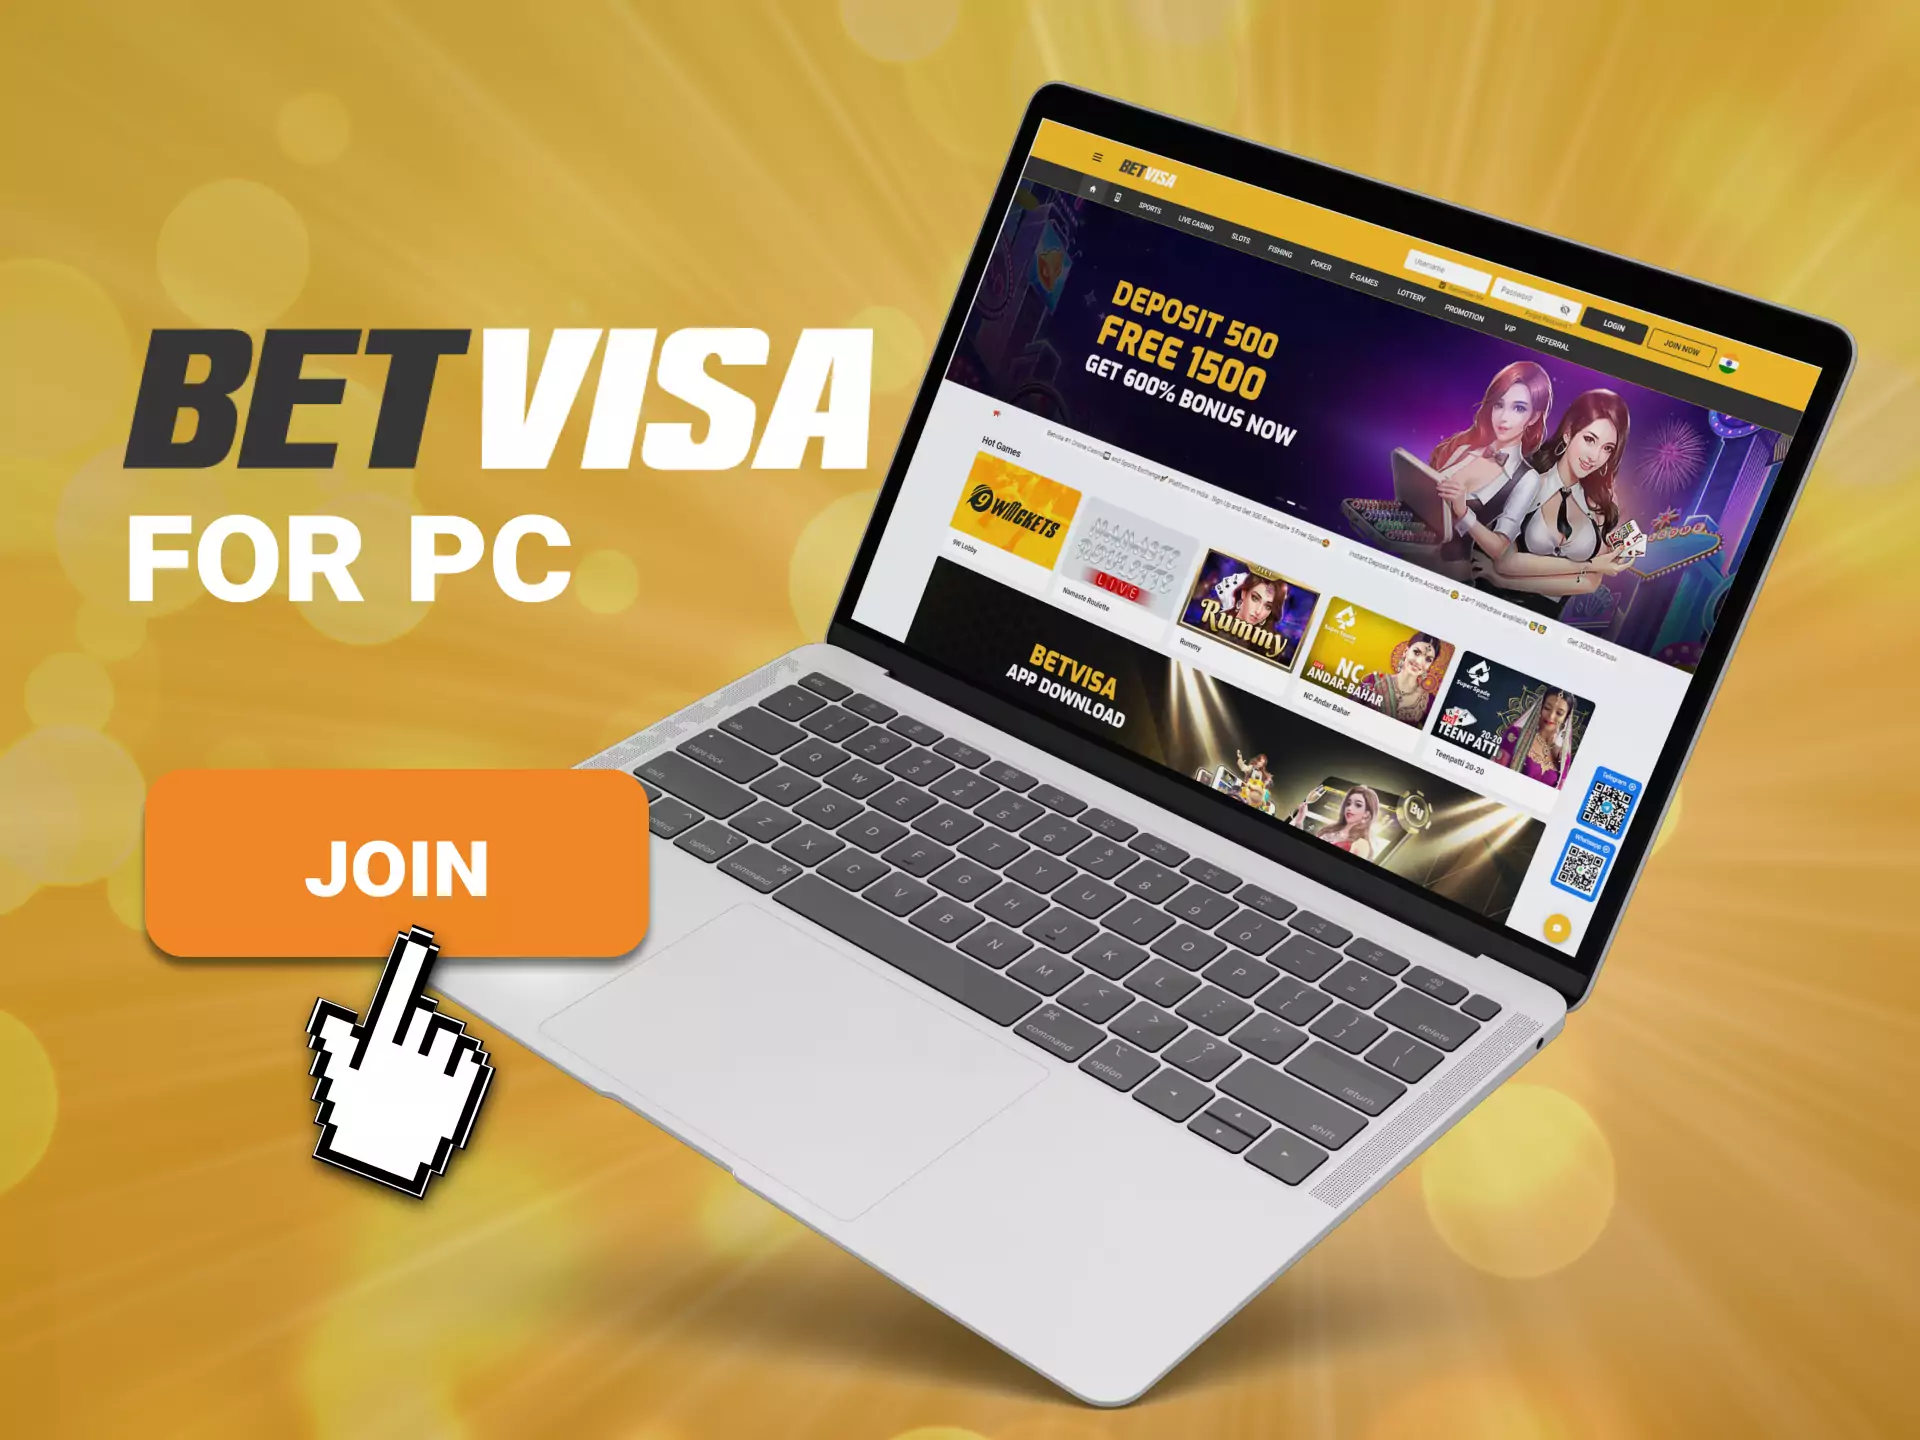 There is no PC client of Betvisa, but you can use the browser version.